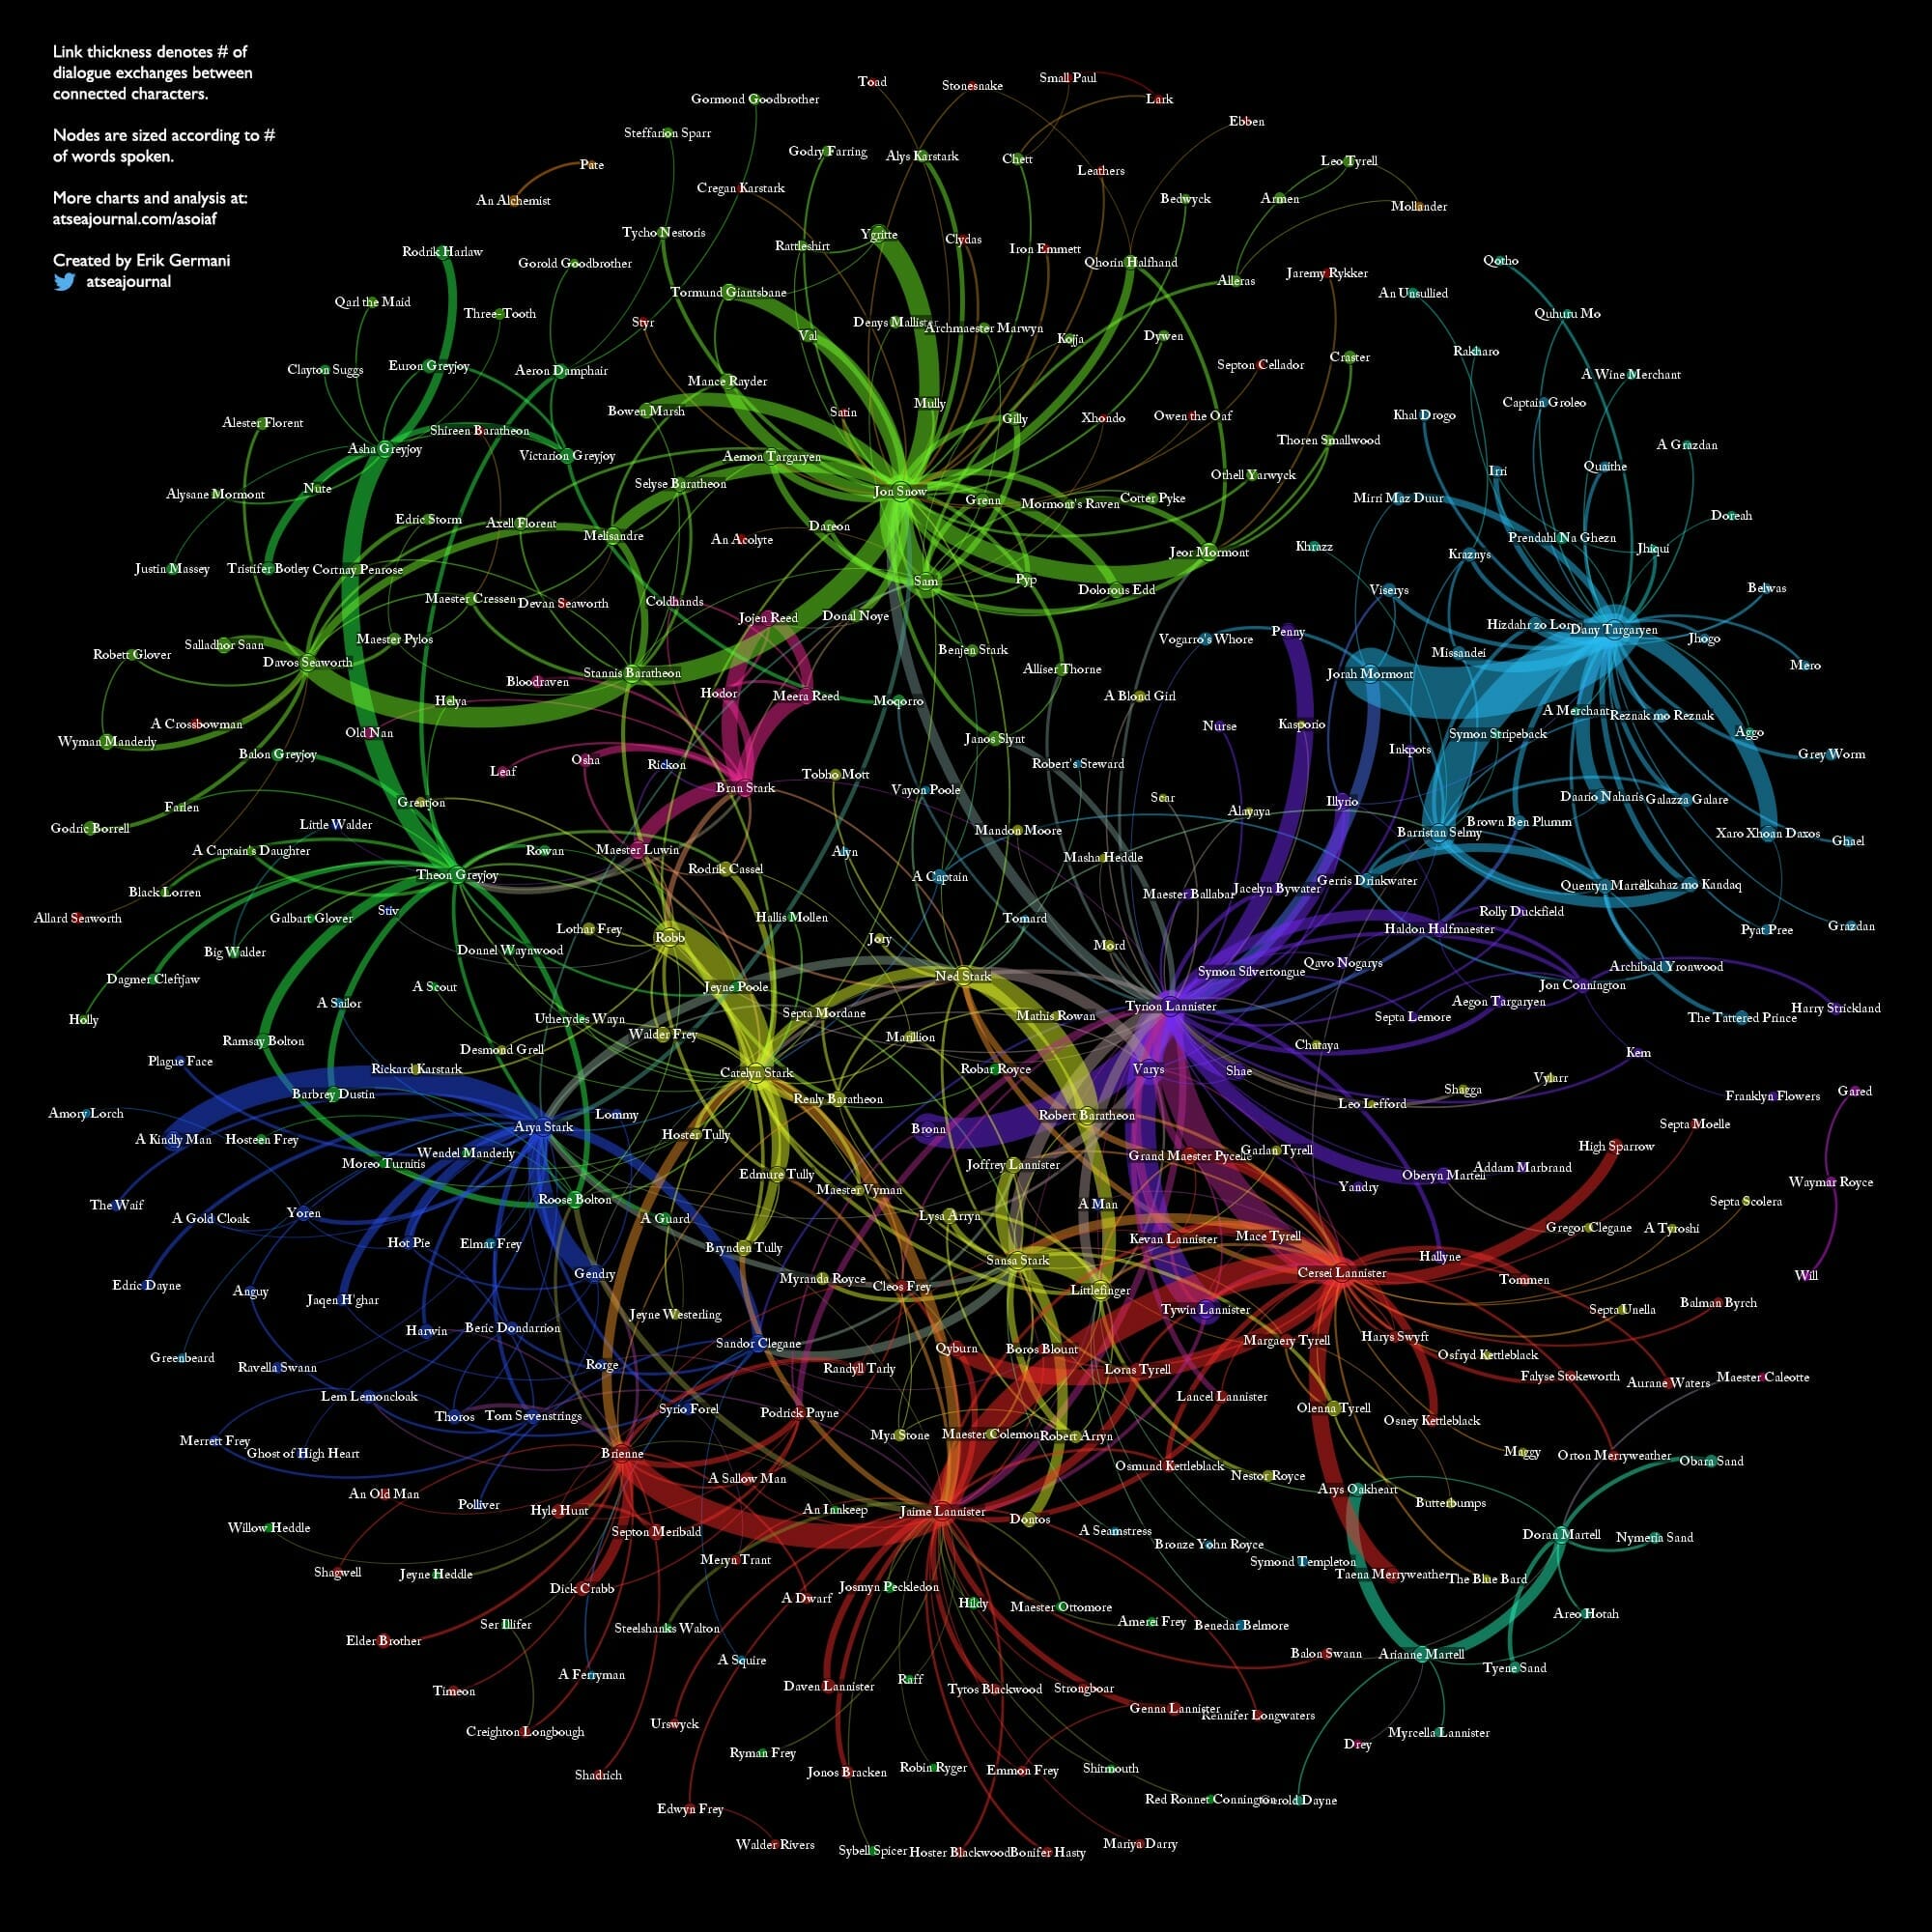 Social networking mapping for Game of Thrones